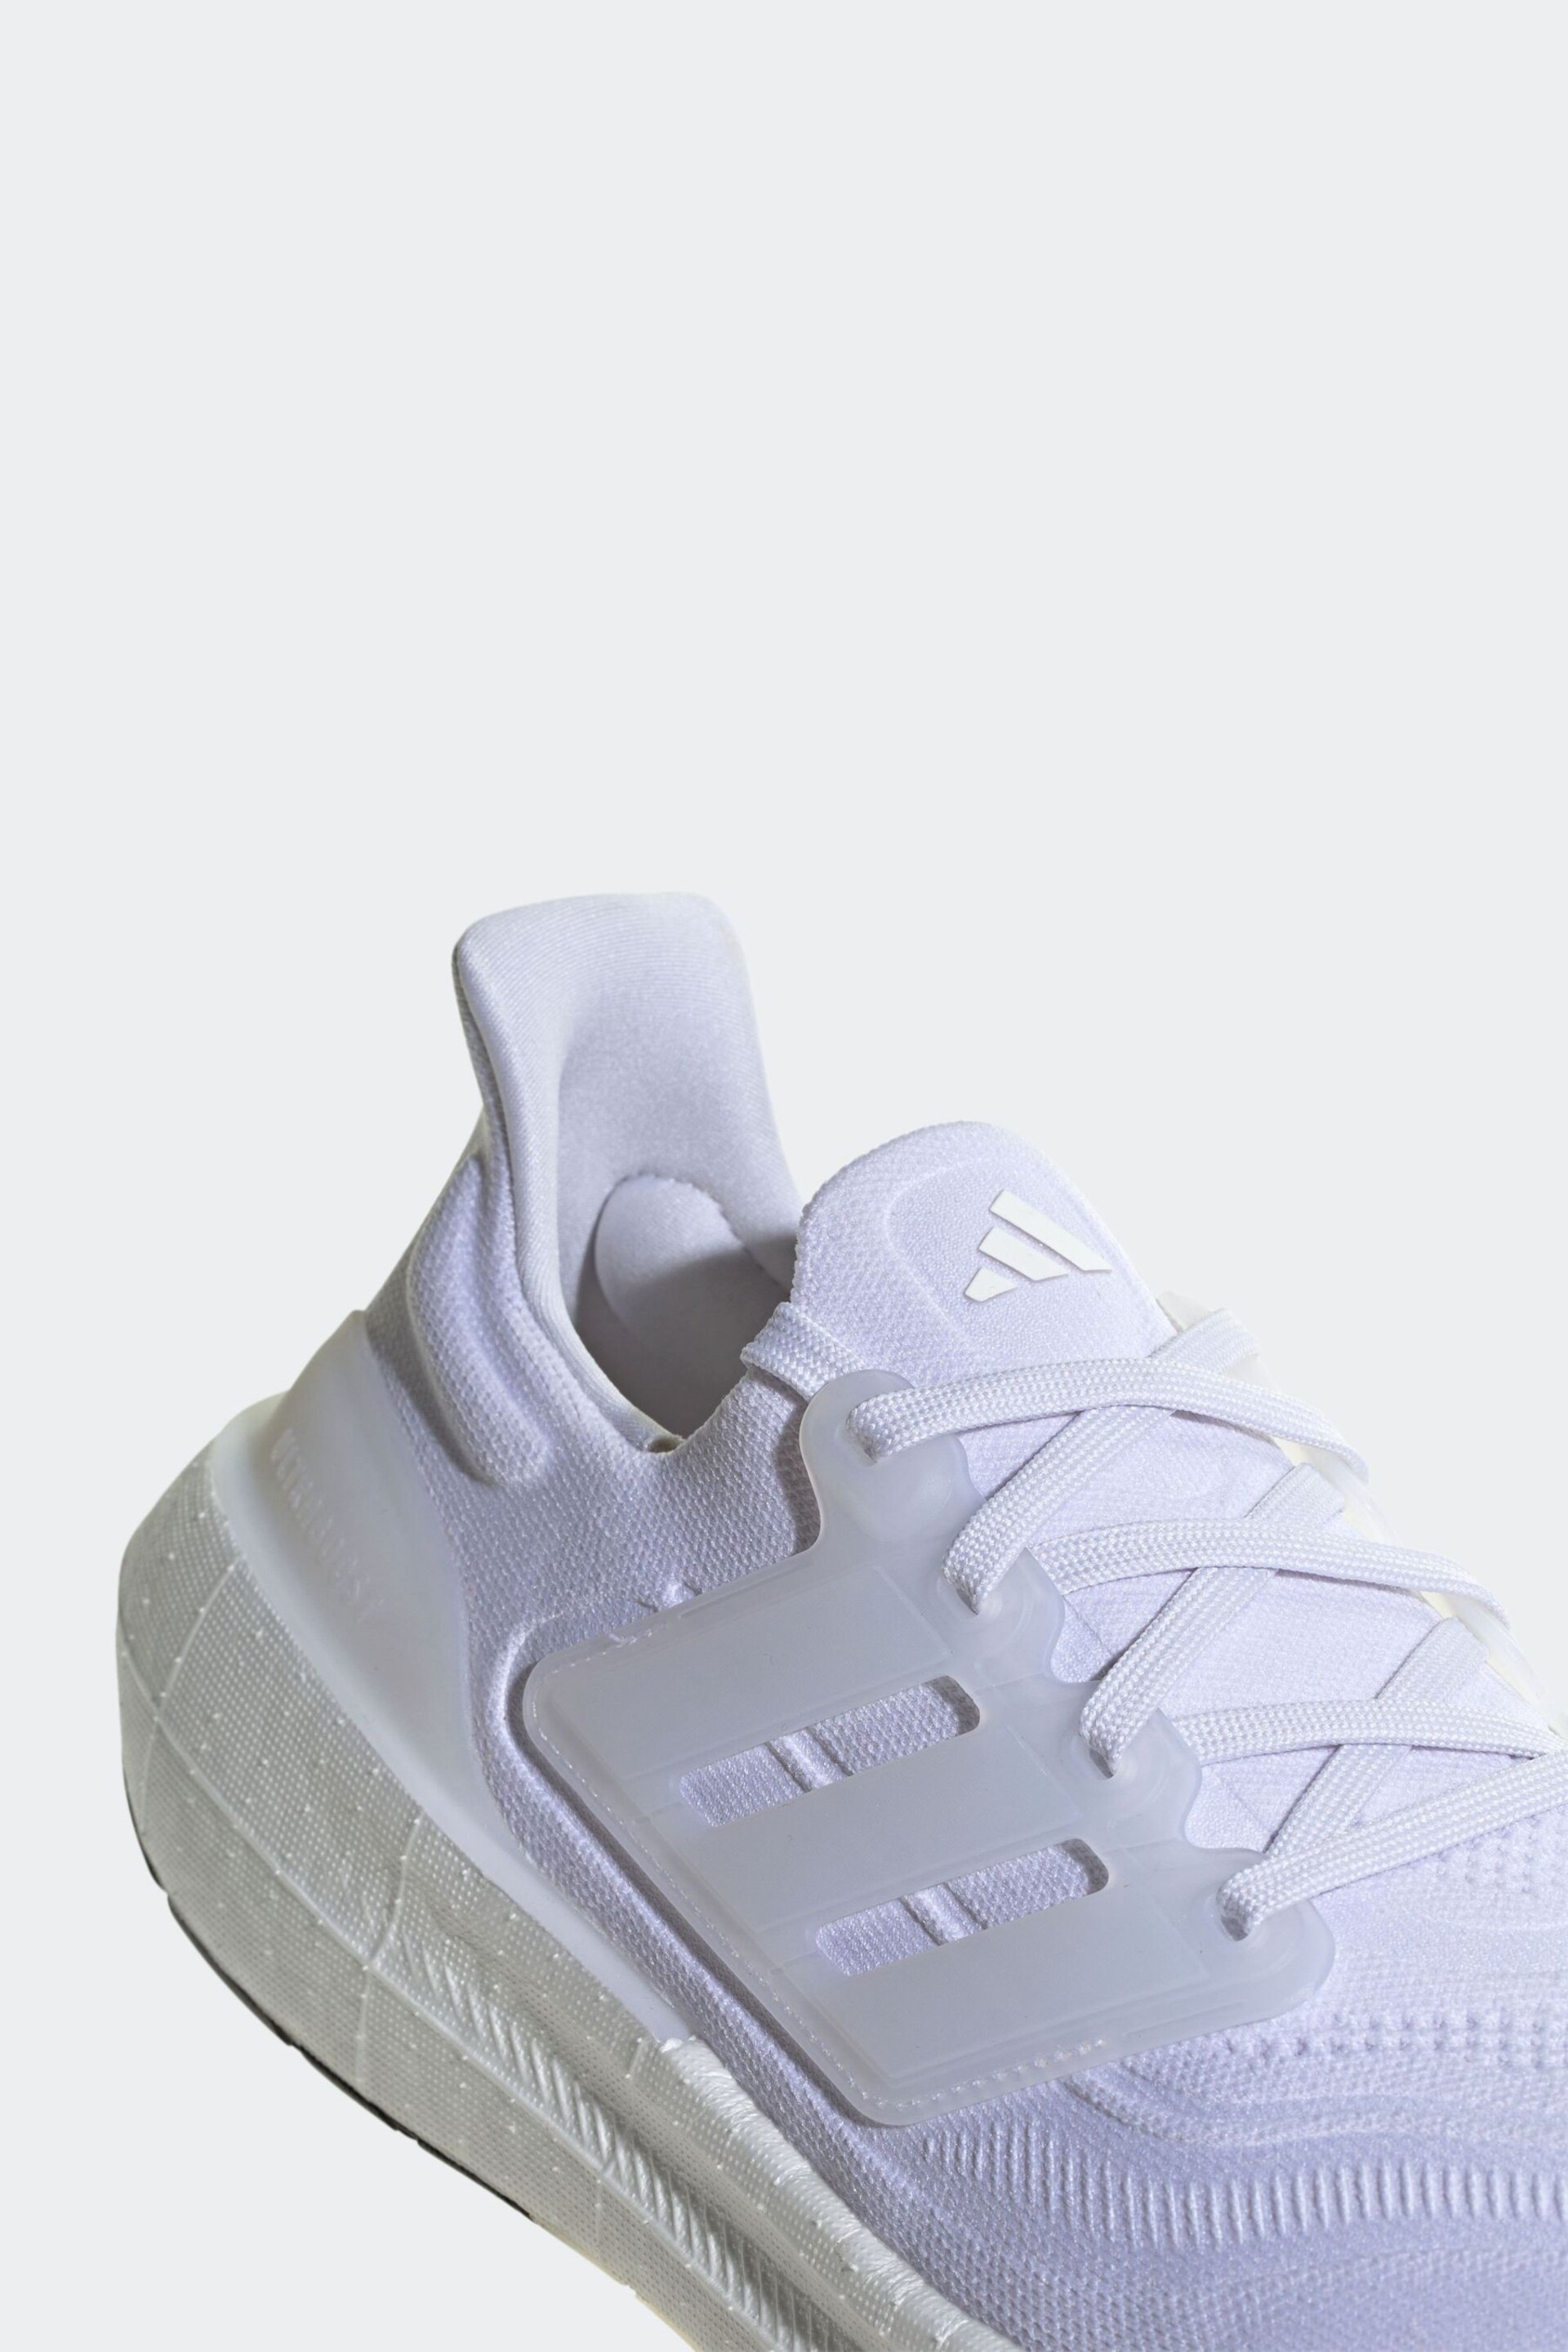 adidas White Ultraboost Light Trainers - Image 9 of 12